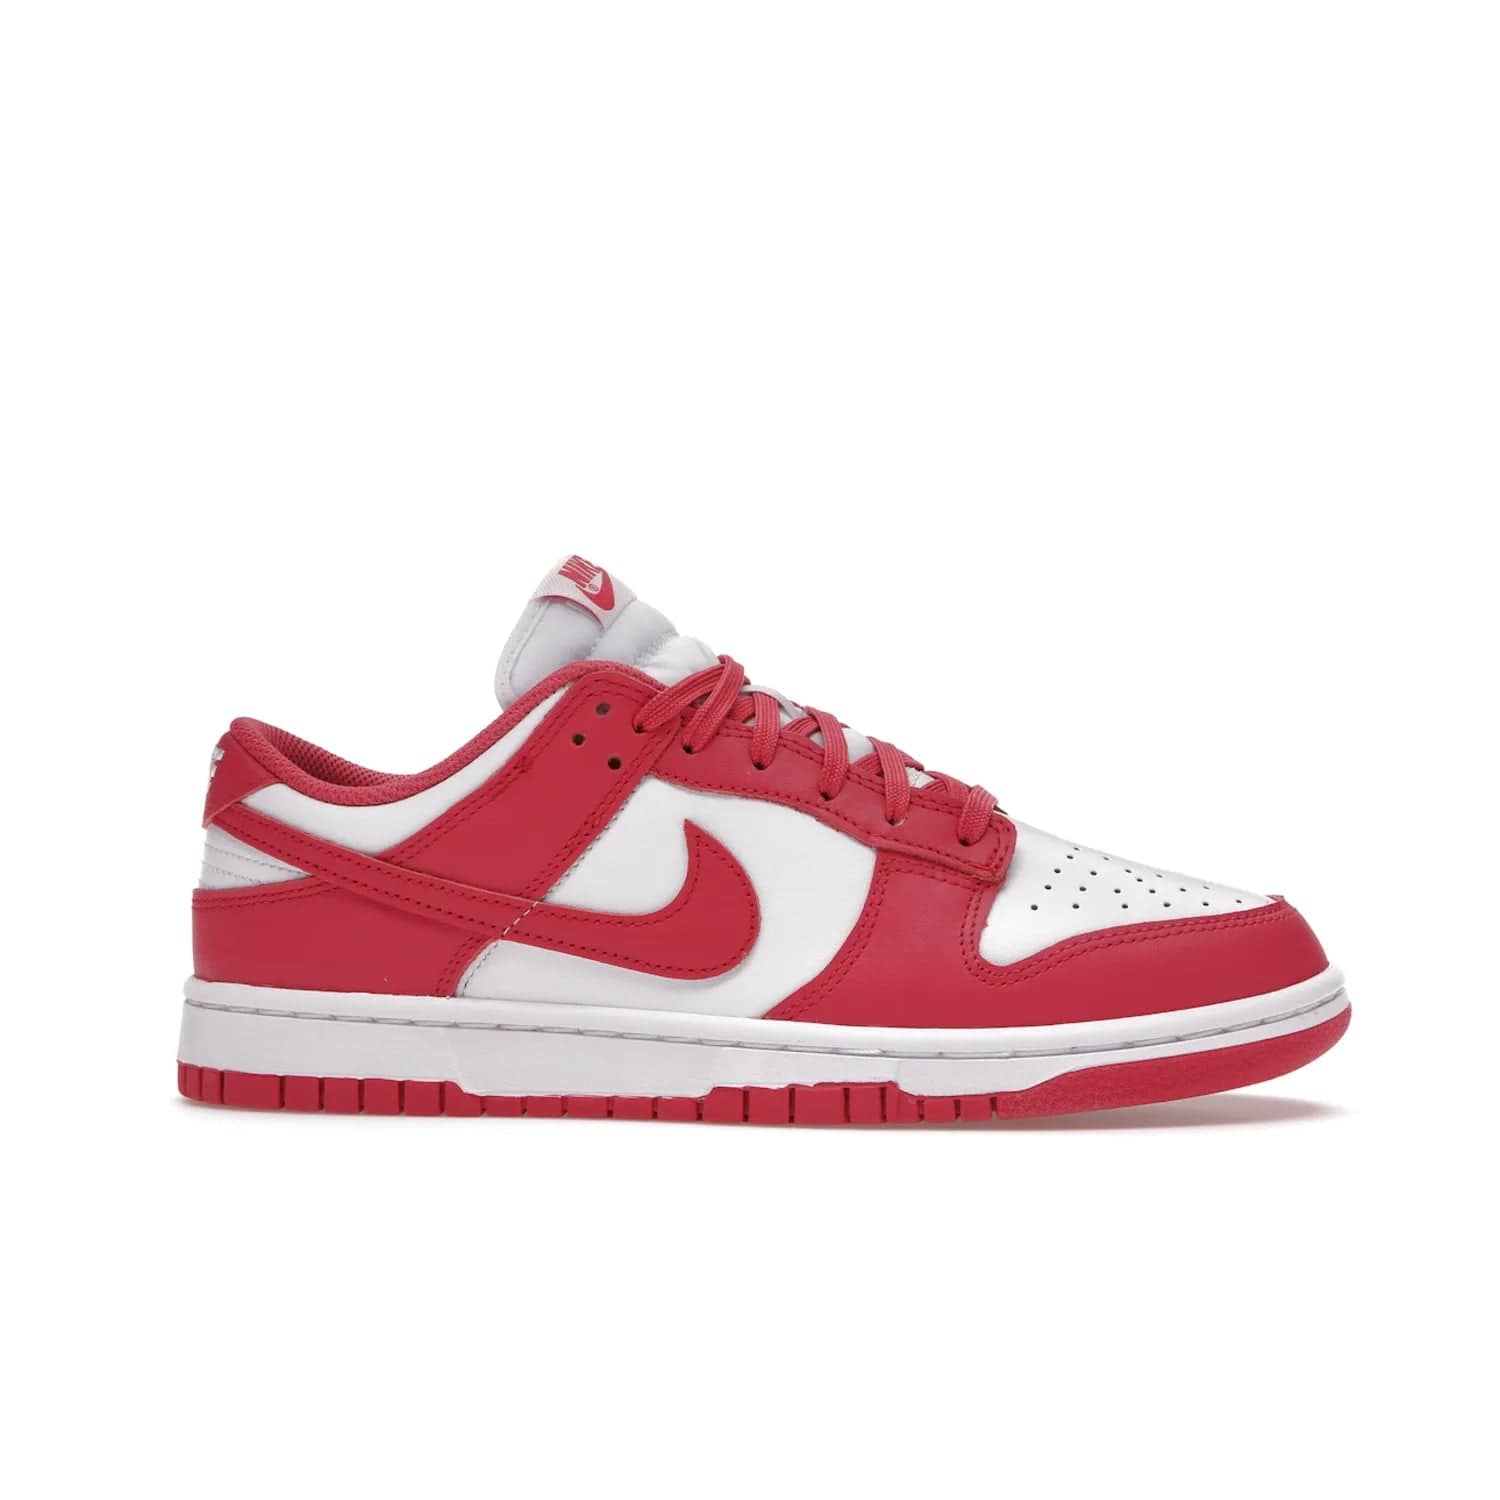 Nike Dunk Low Archeo Pink (Women's) - Image 2 - Only at www.BallersClubKickz.com - Introducing the stylish and comfortable Nike Dunk Low Archeo Pink (Women's). White/Archeo Pink colorway with white leather upper, pink overlays and Swooshes. Get yours now!